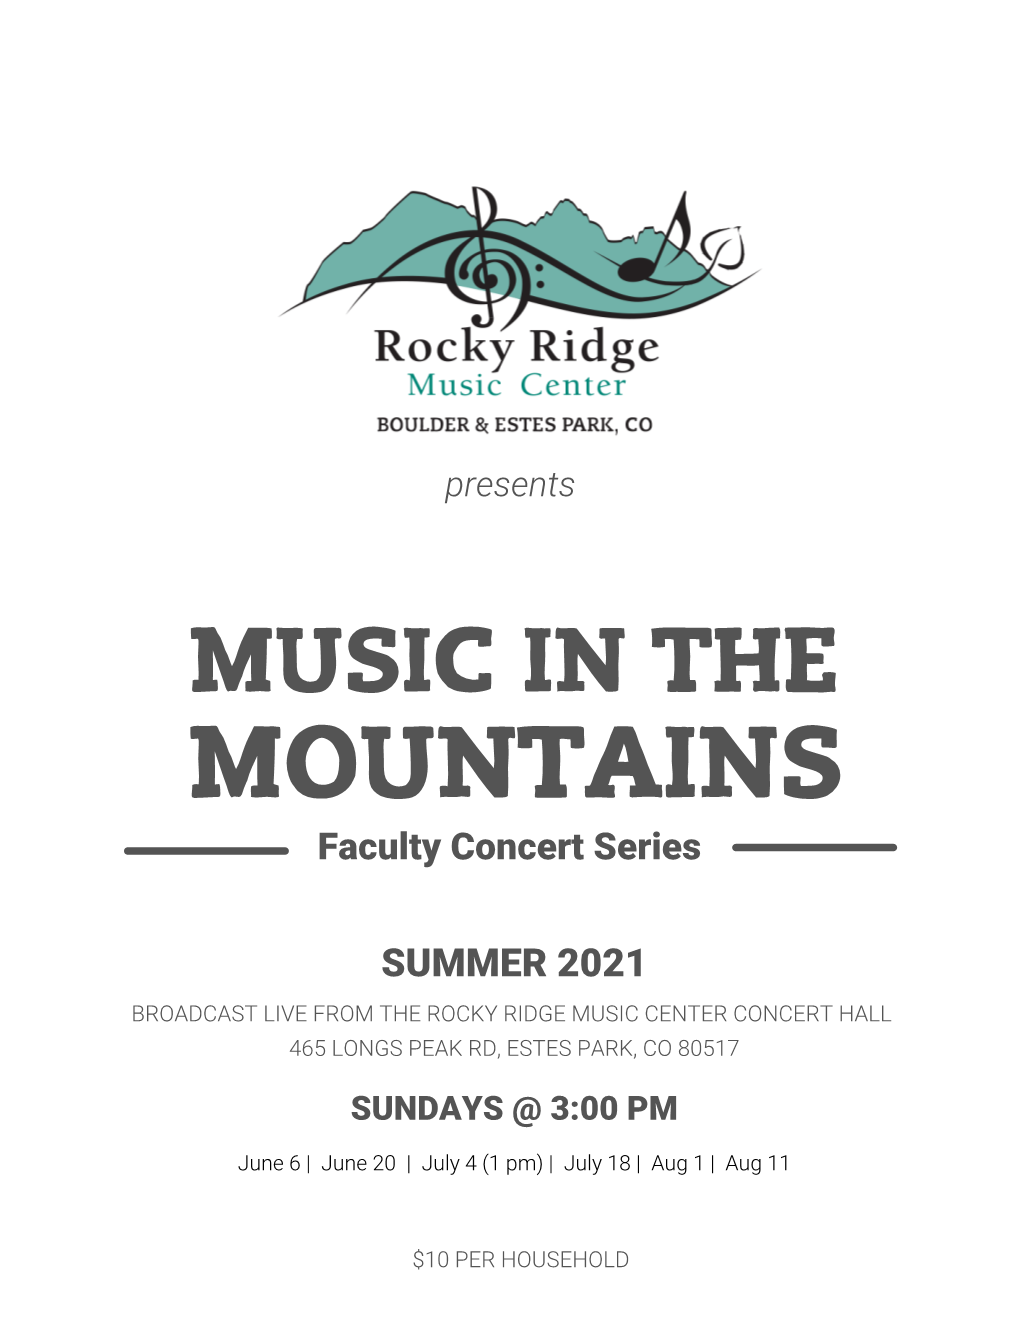 Music in the Mountains: Faculty Concert Series Program 1